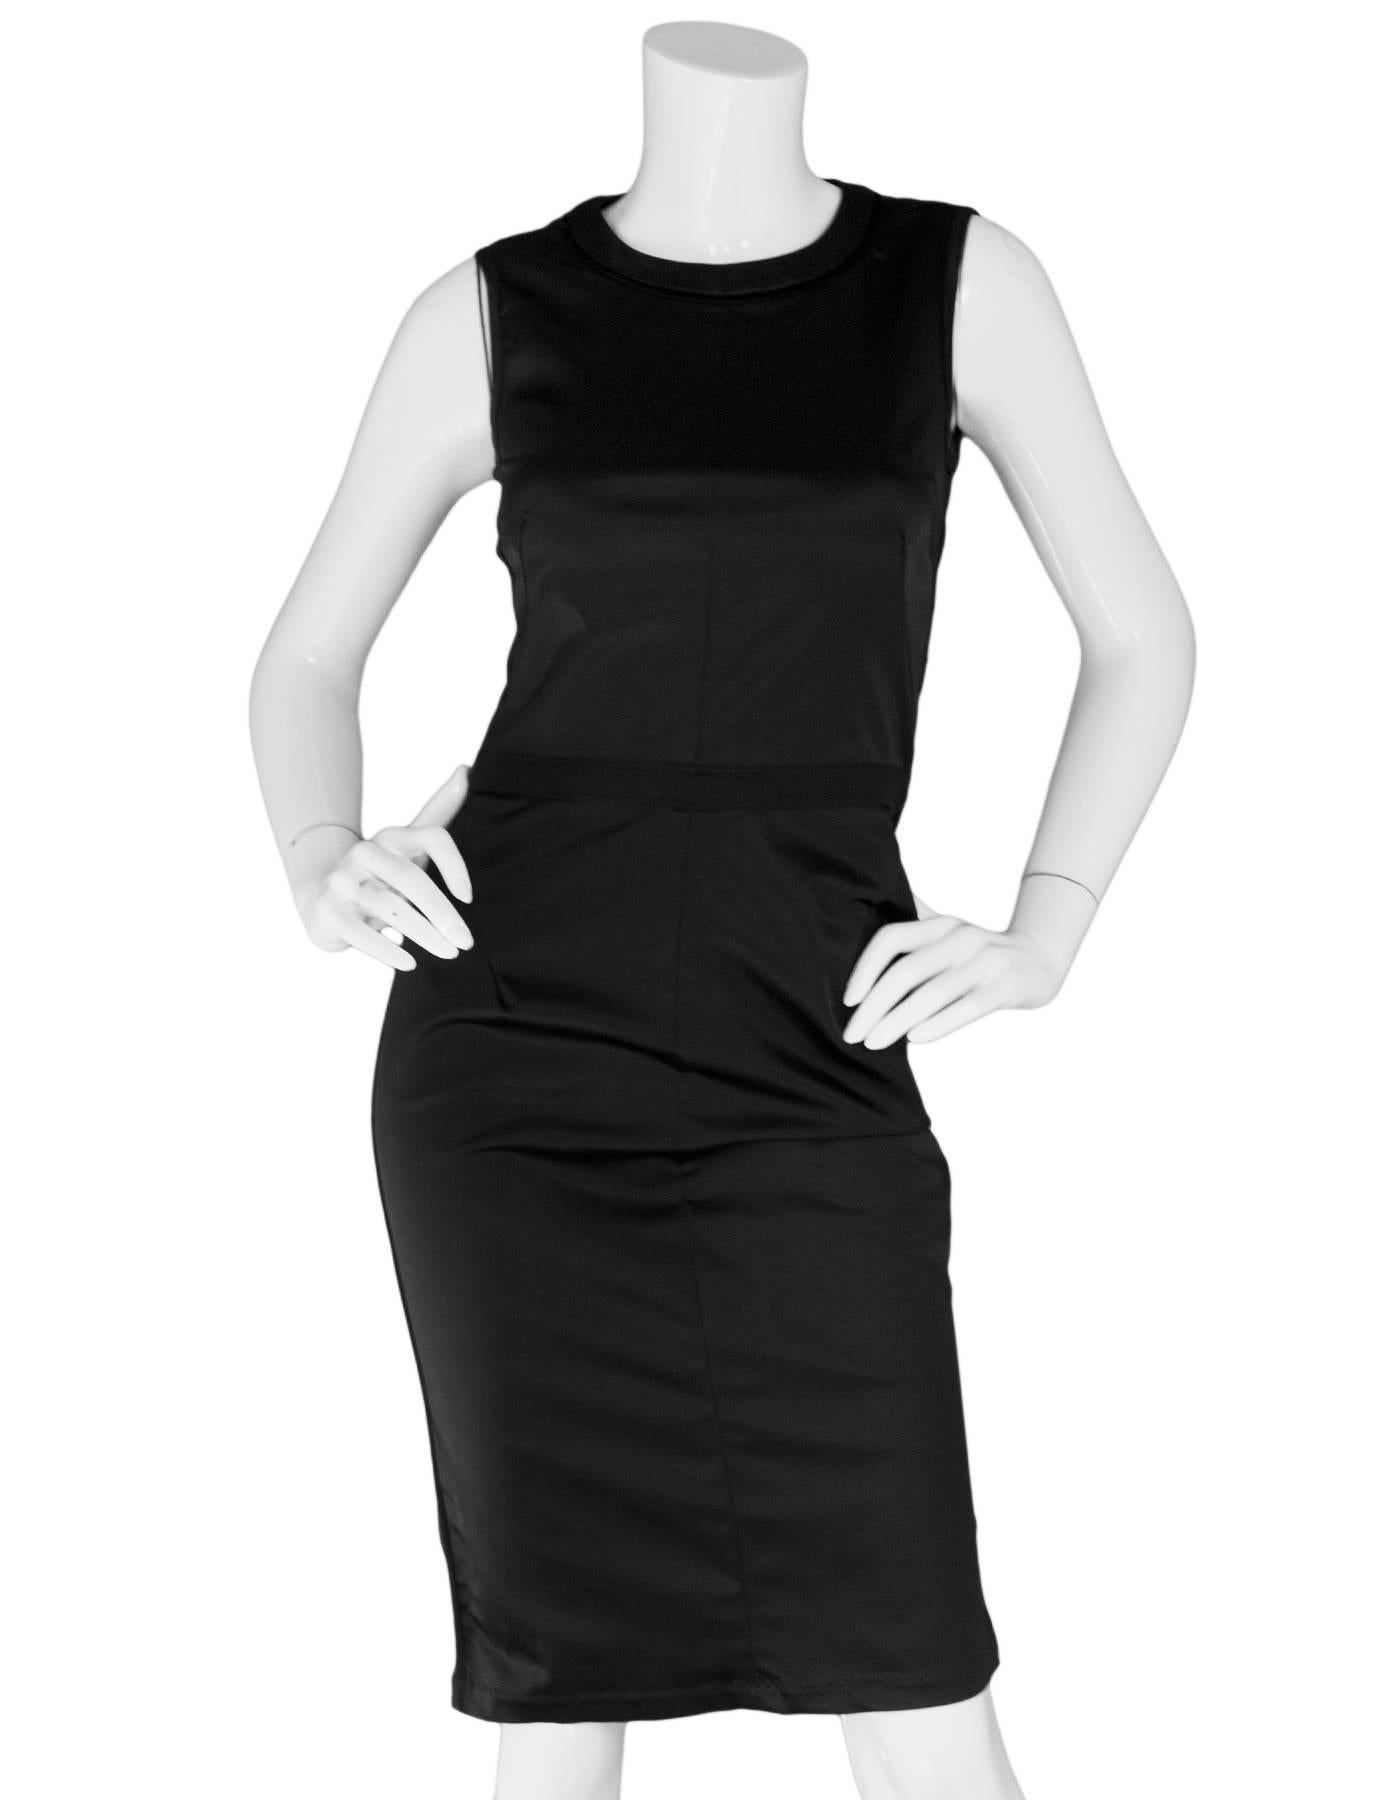 D&G Black Sleeveless Dress Sz IT40

Made In: Romania
Color: Black
Composition: 63% polyamid, 26% acetate, 11% elastane
Lining: Black textile
Closure/Opening: Back zip closure with strap across back
Exterior Pockets: None
Interior Pockets: